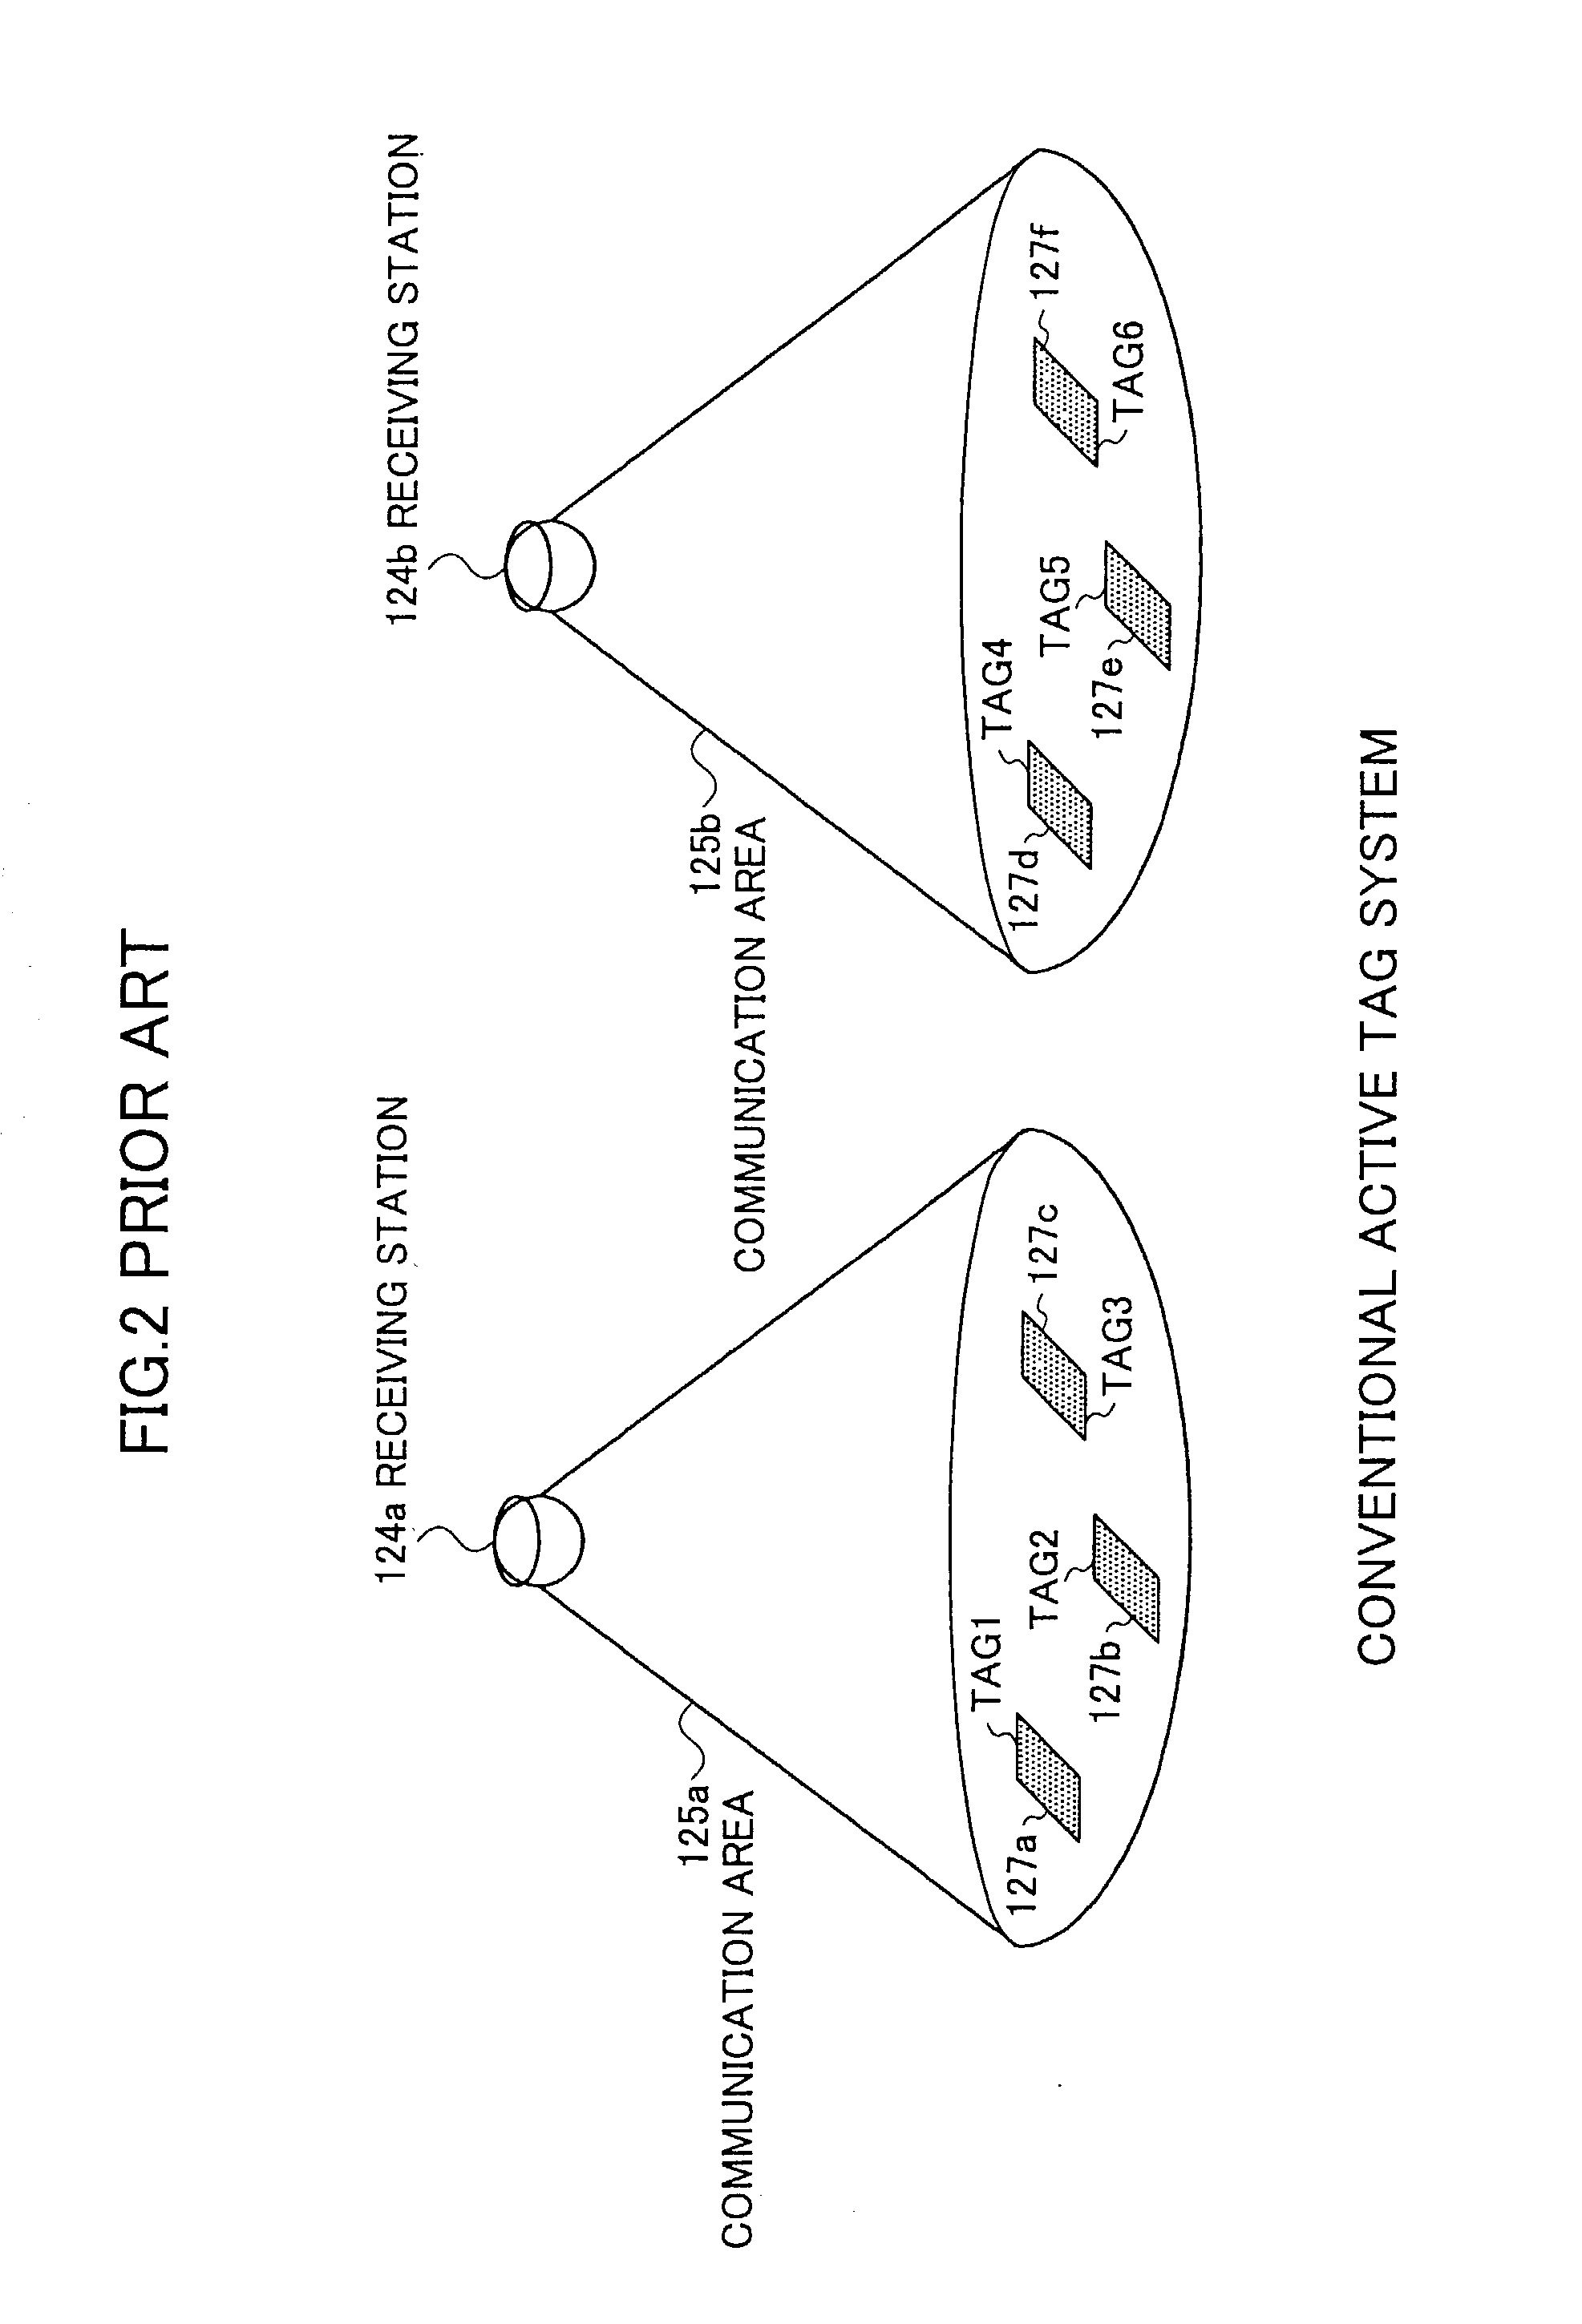 Locating system and method for determining positions of objects